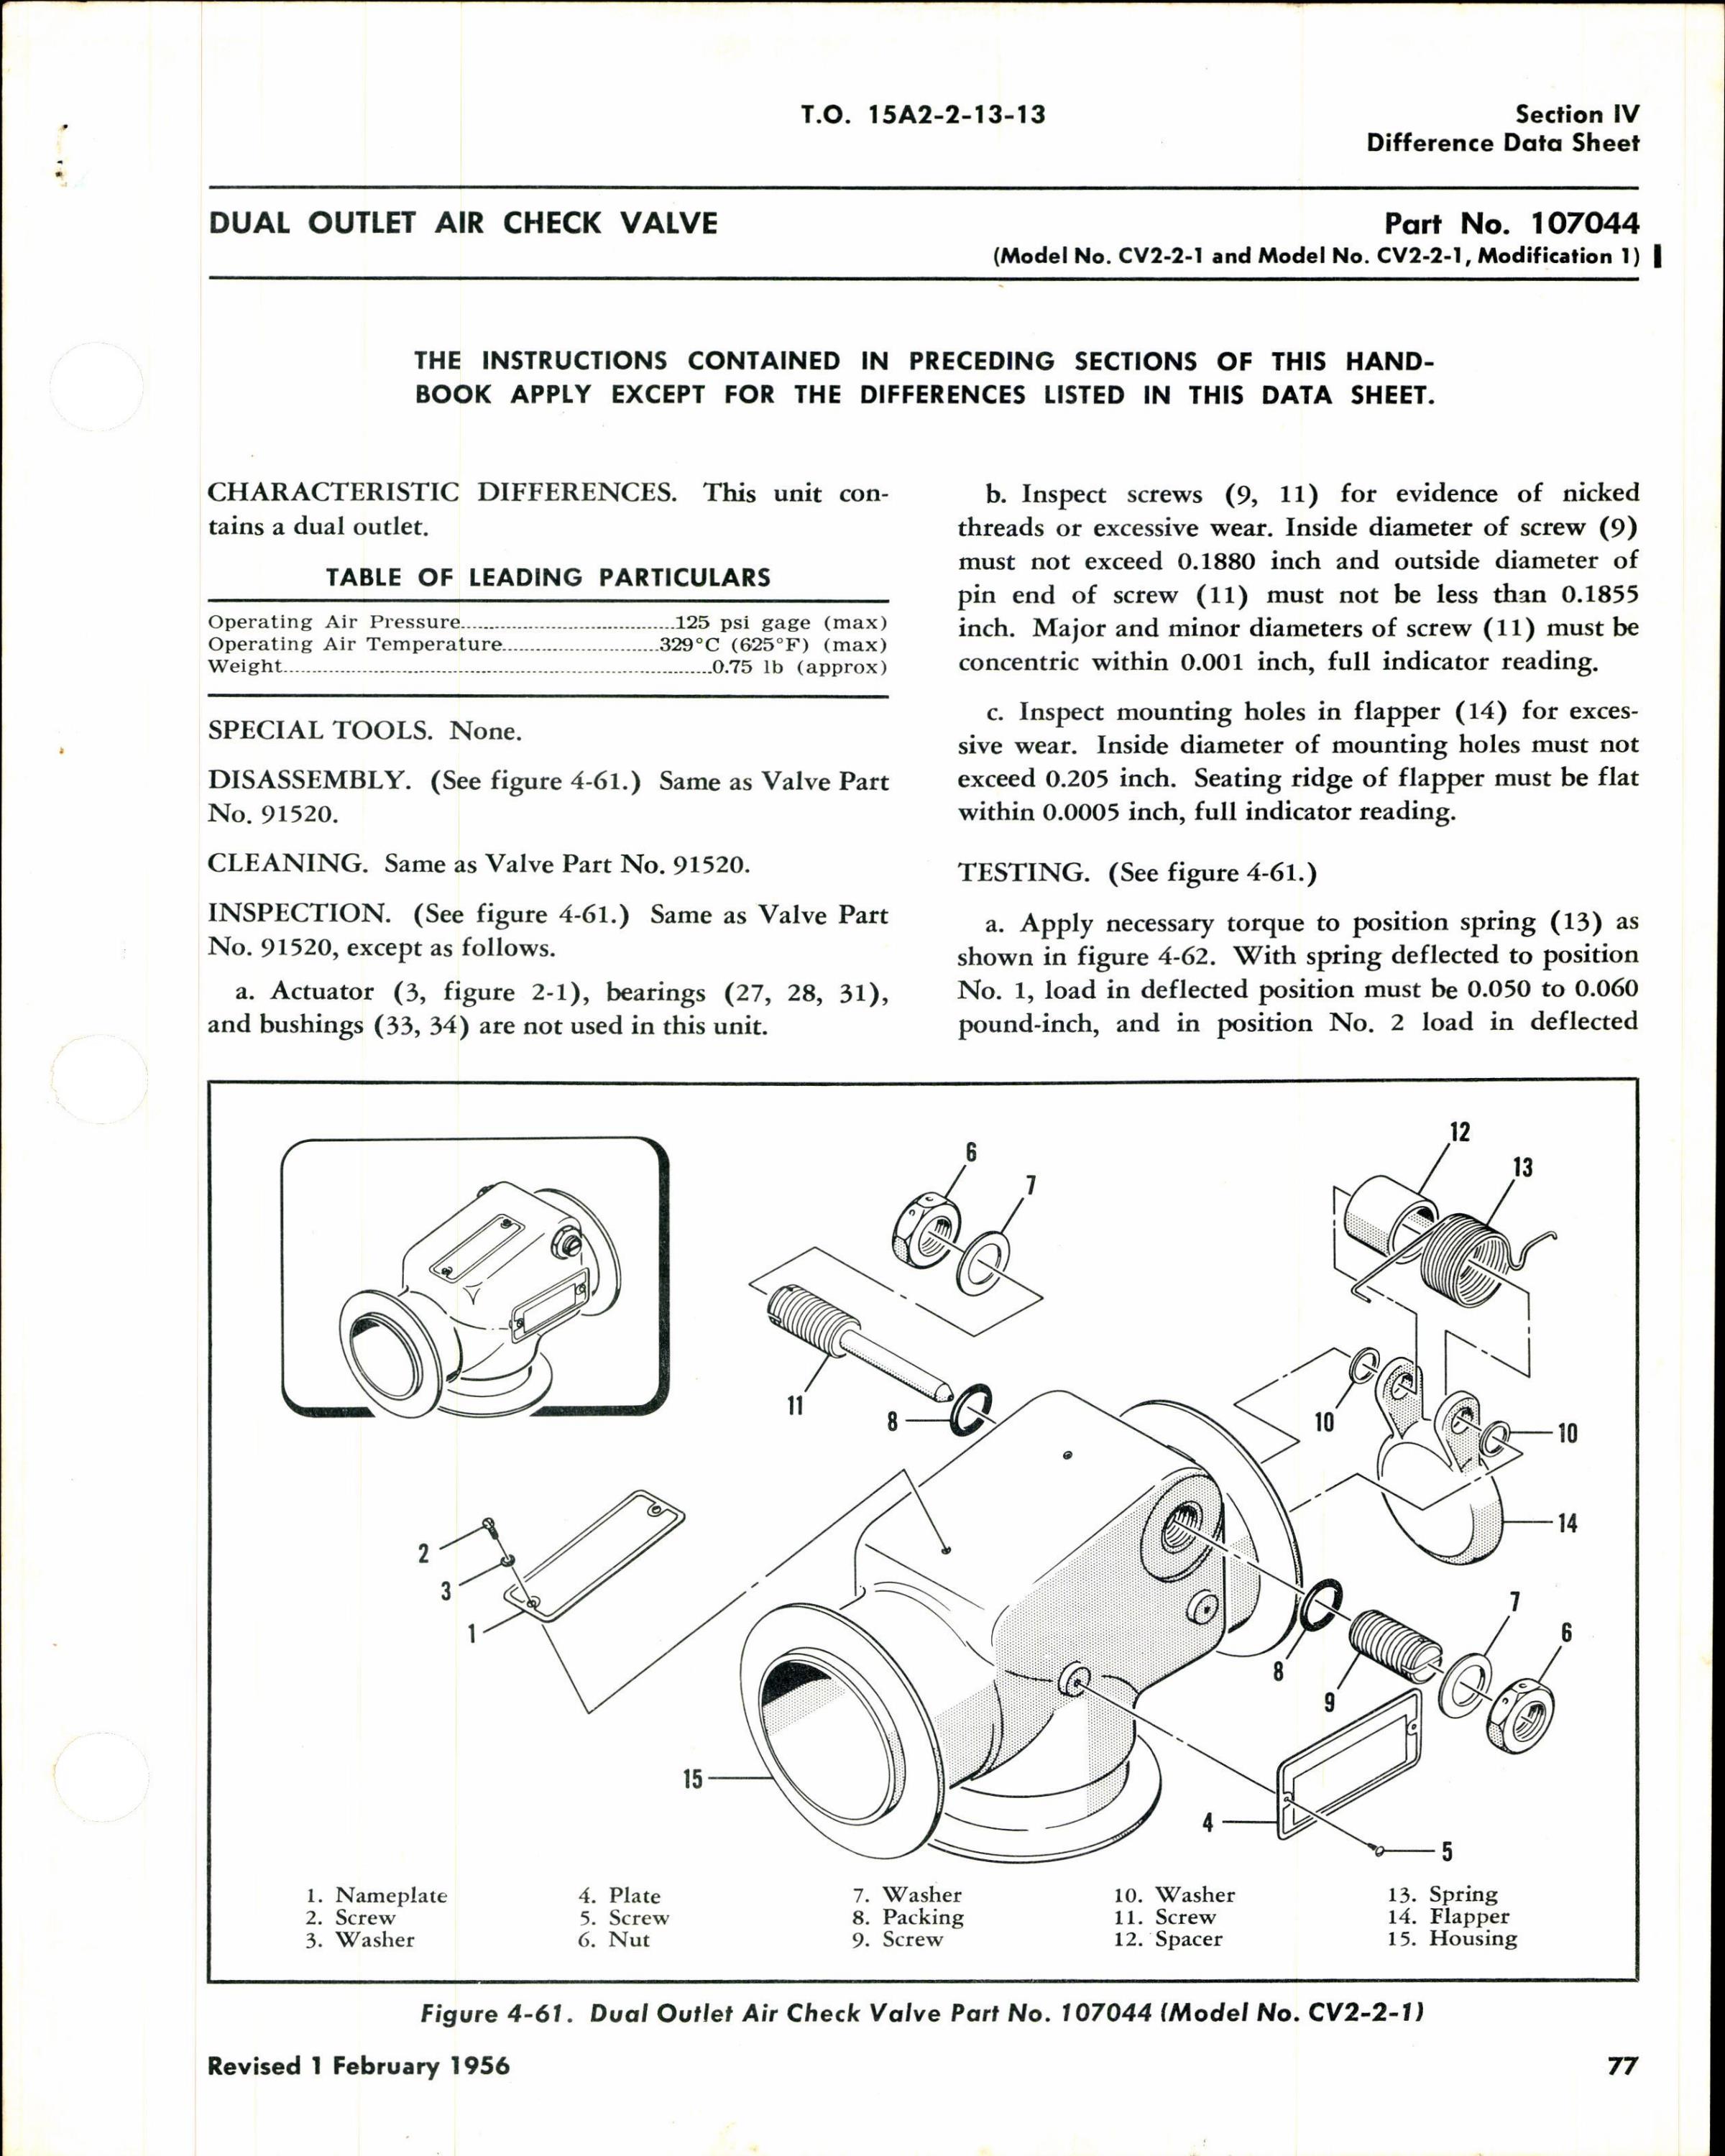 Sample page 3 from AirCorps Library document: Overhaul Instructions for Check and Shutoff Valves